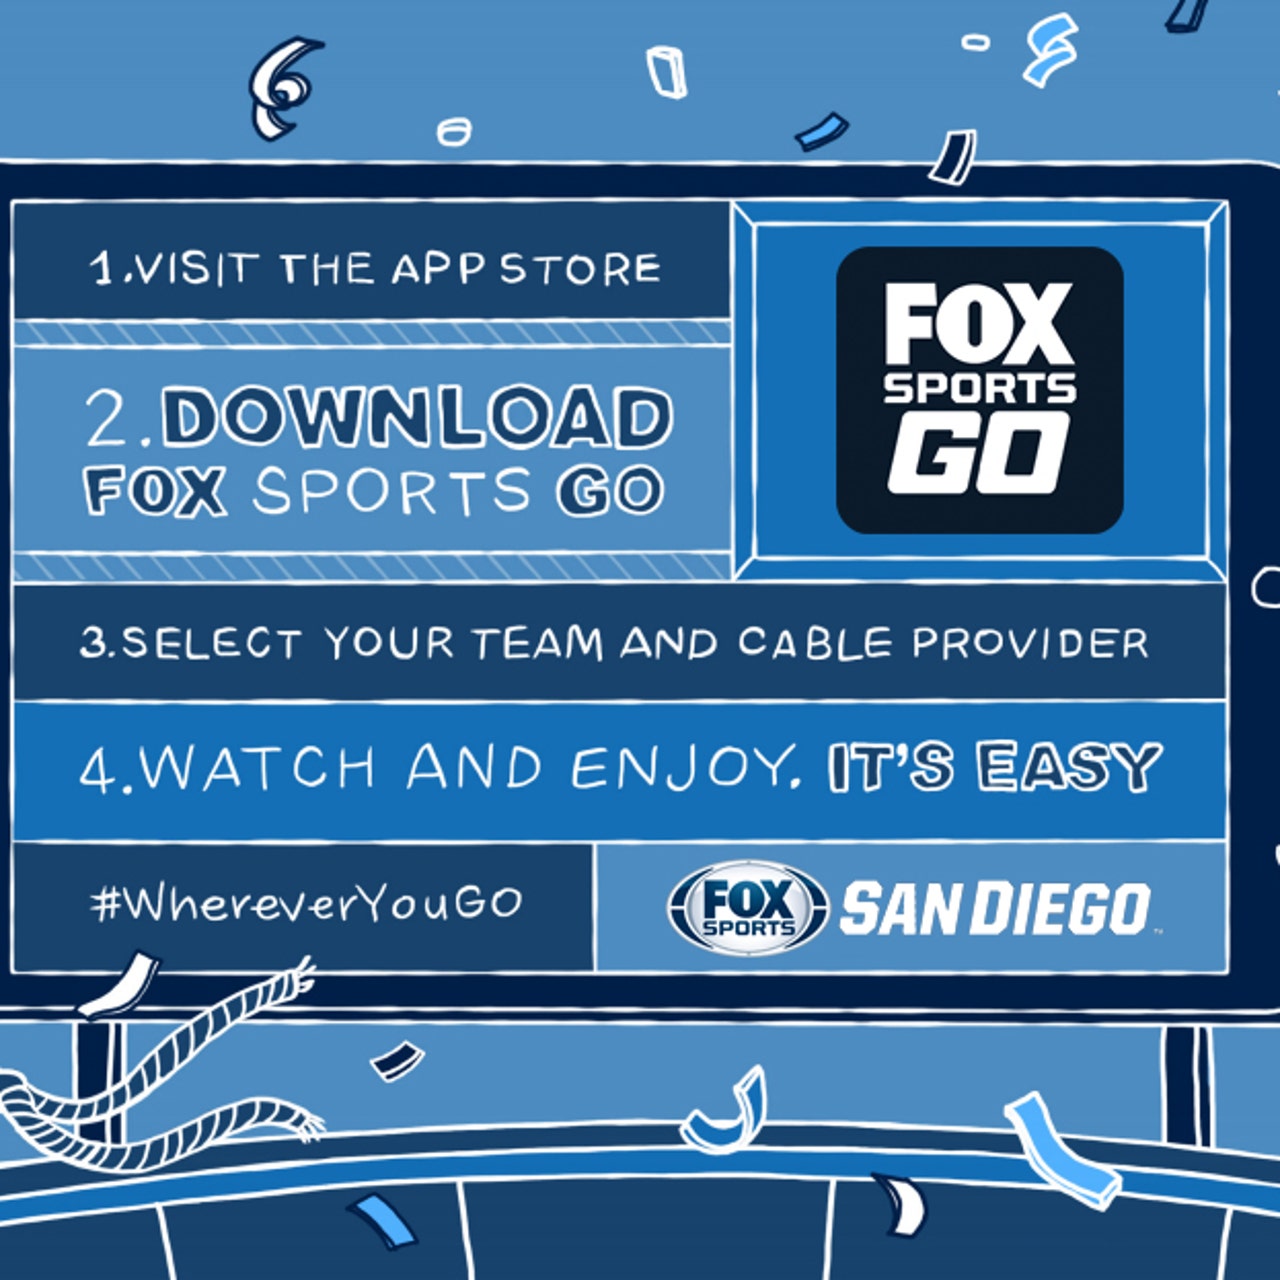 Watch LIVE Padres games at home or on the go with FOX Sports GO FOX Sports